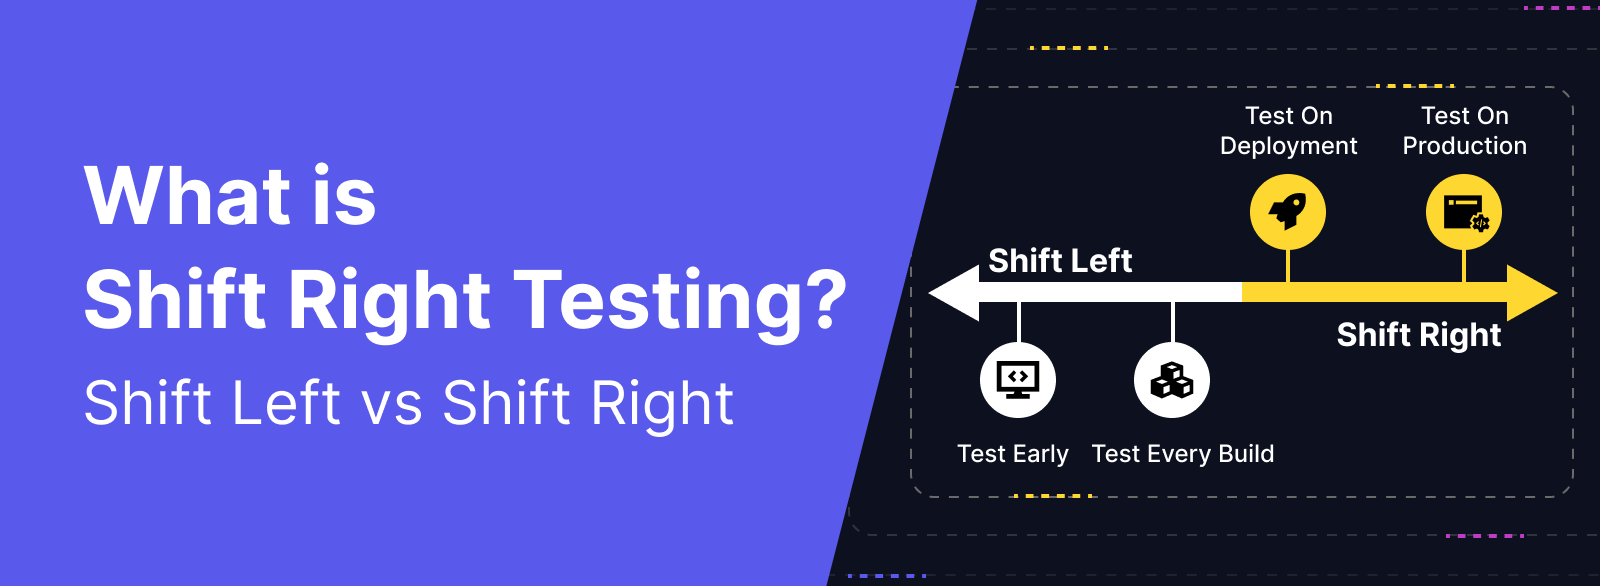 what is shift right testing